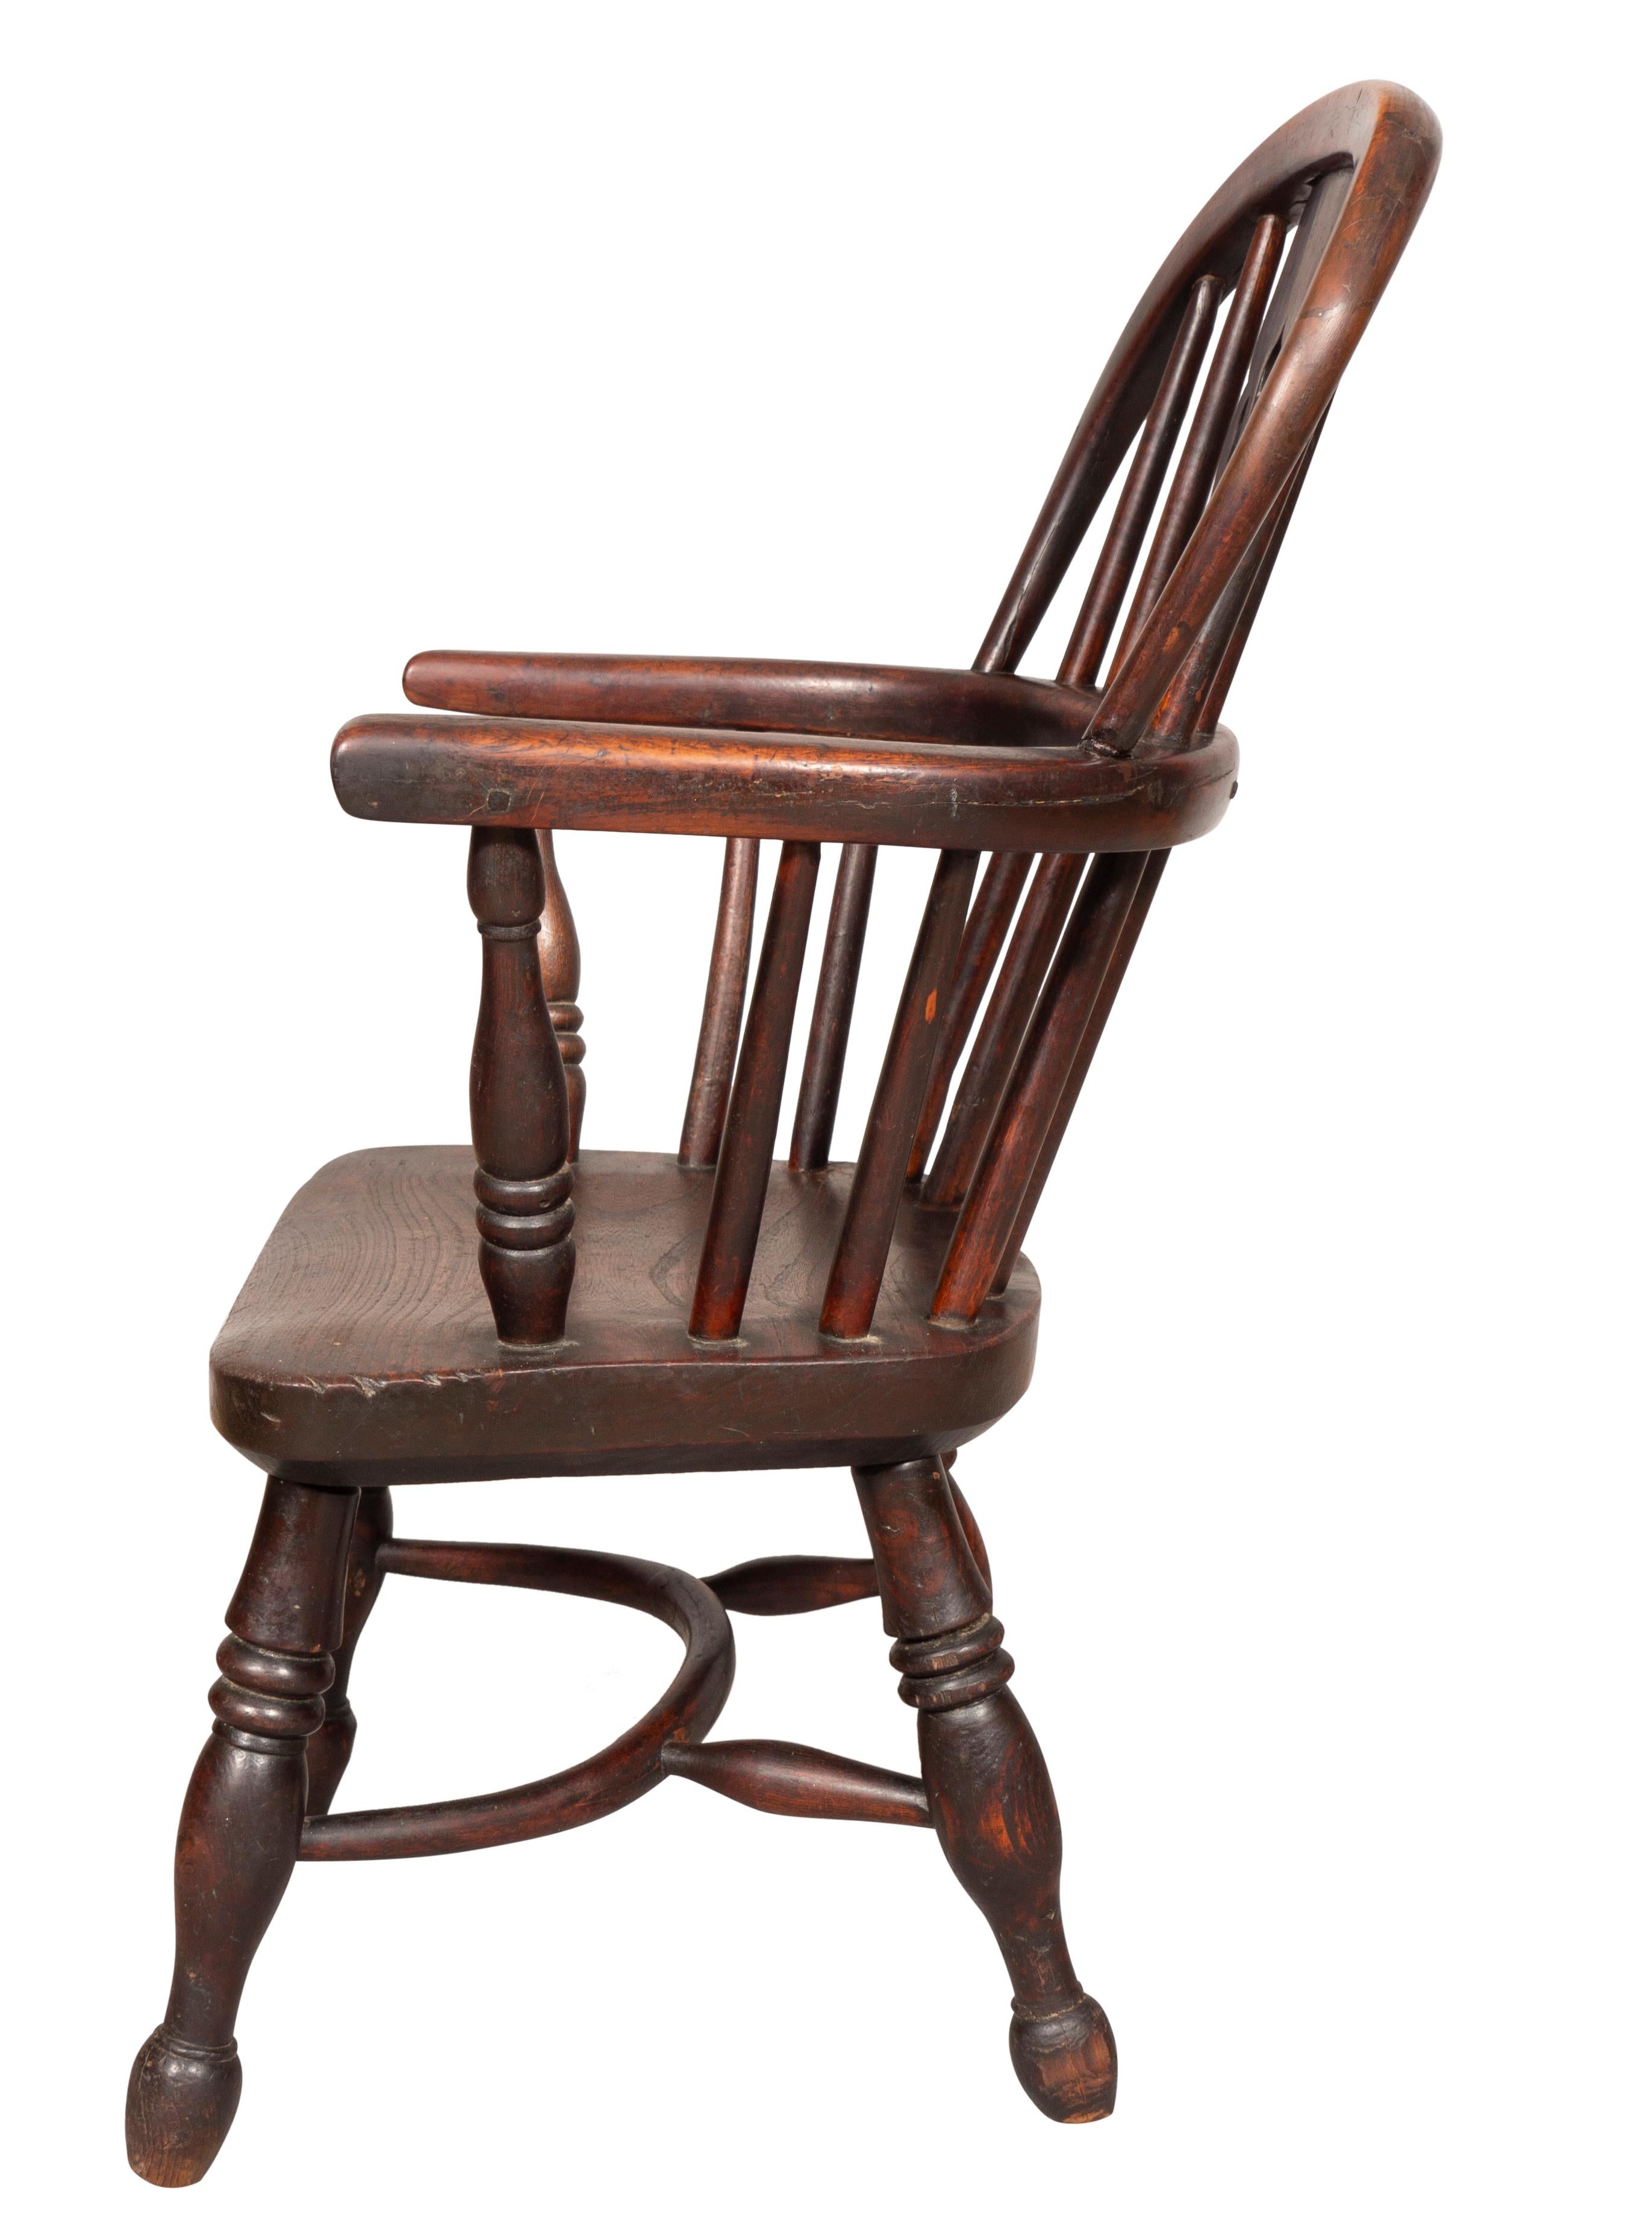 Late Regency Childs Yew and Elm Windsor Armchair For Sale 1